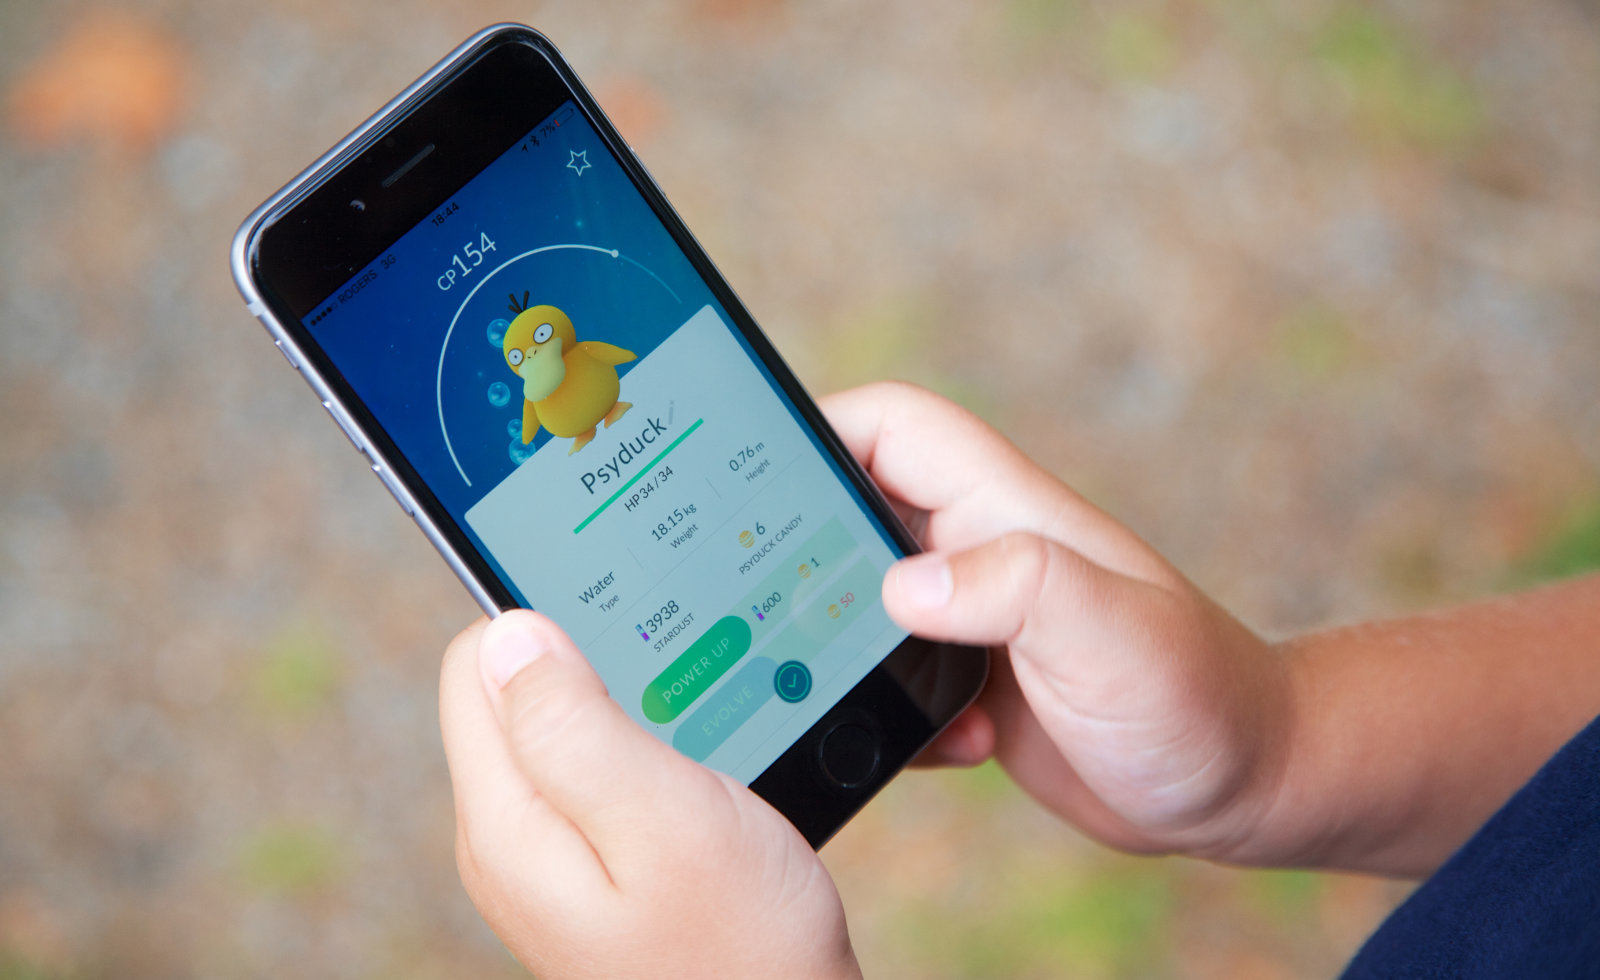 Pokémon Go players can use Facebook to log in and sync devices | DeviceDaily.com